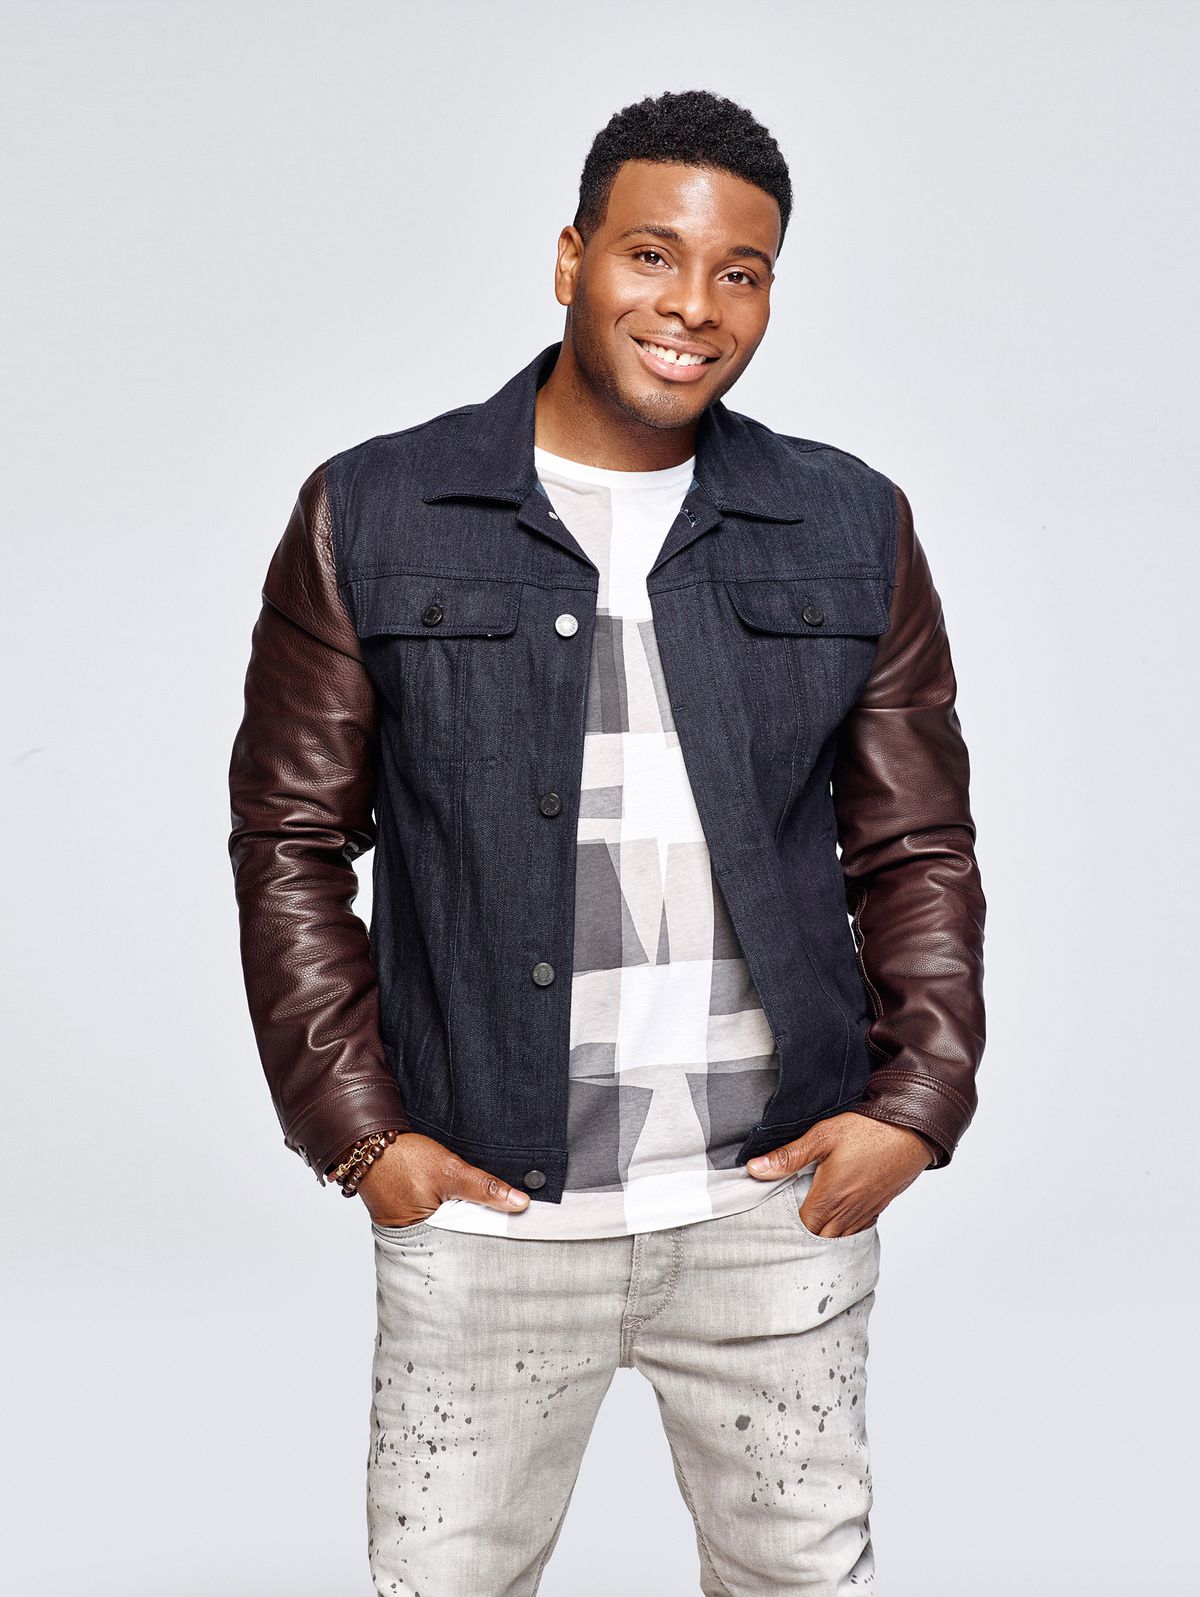 Kel Mitchell stars as Double G in Nickelodeon’s “Game Shakers” show. | Photo credit: Robert Voets/Nickelodeon.